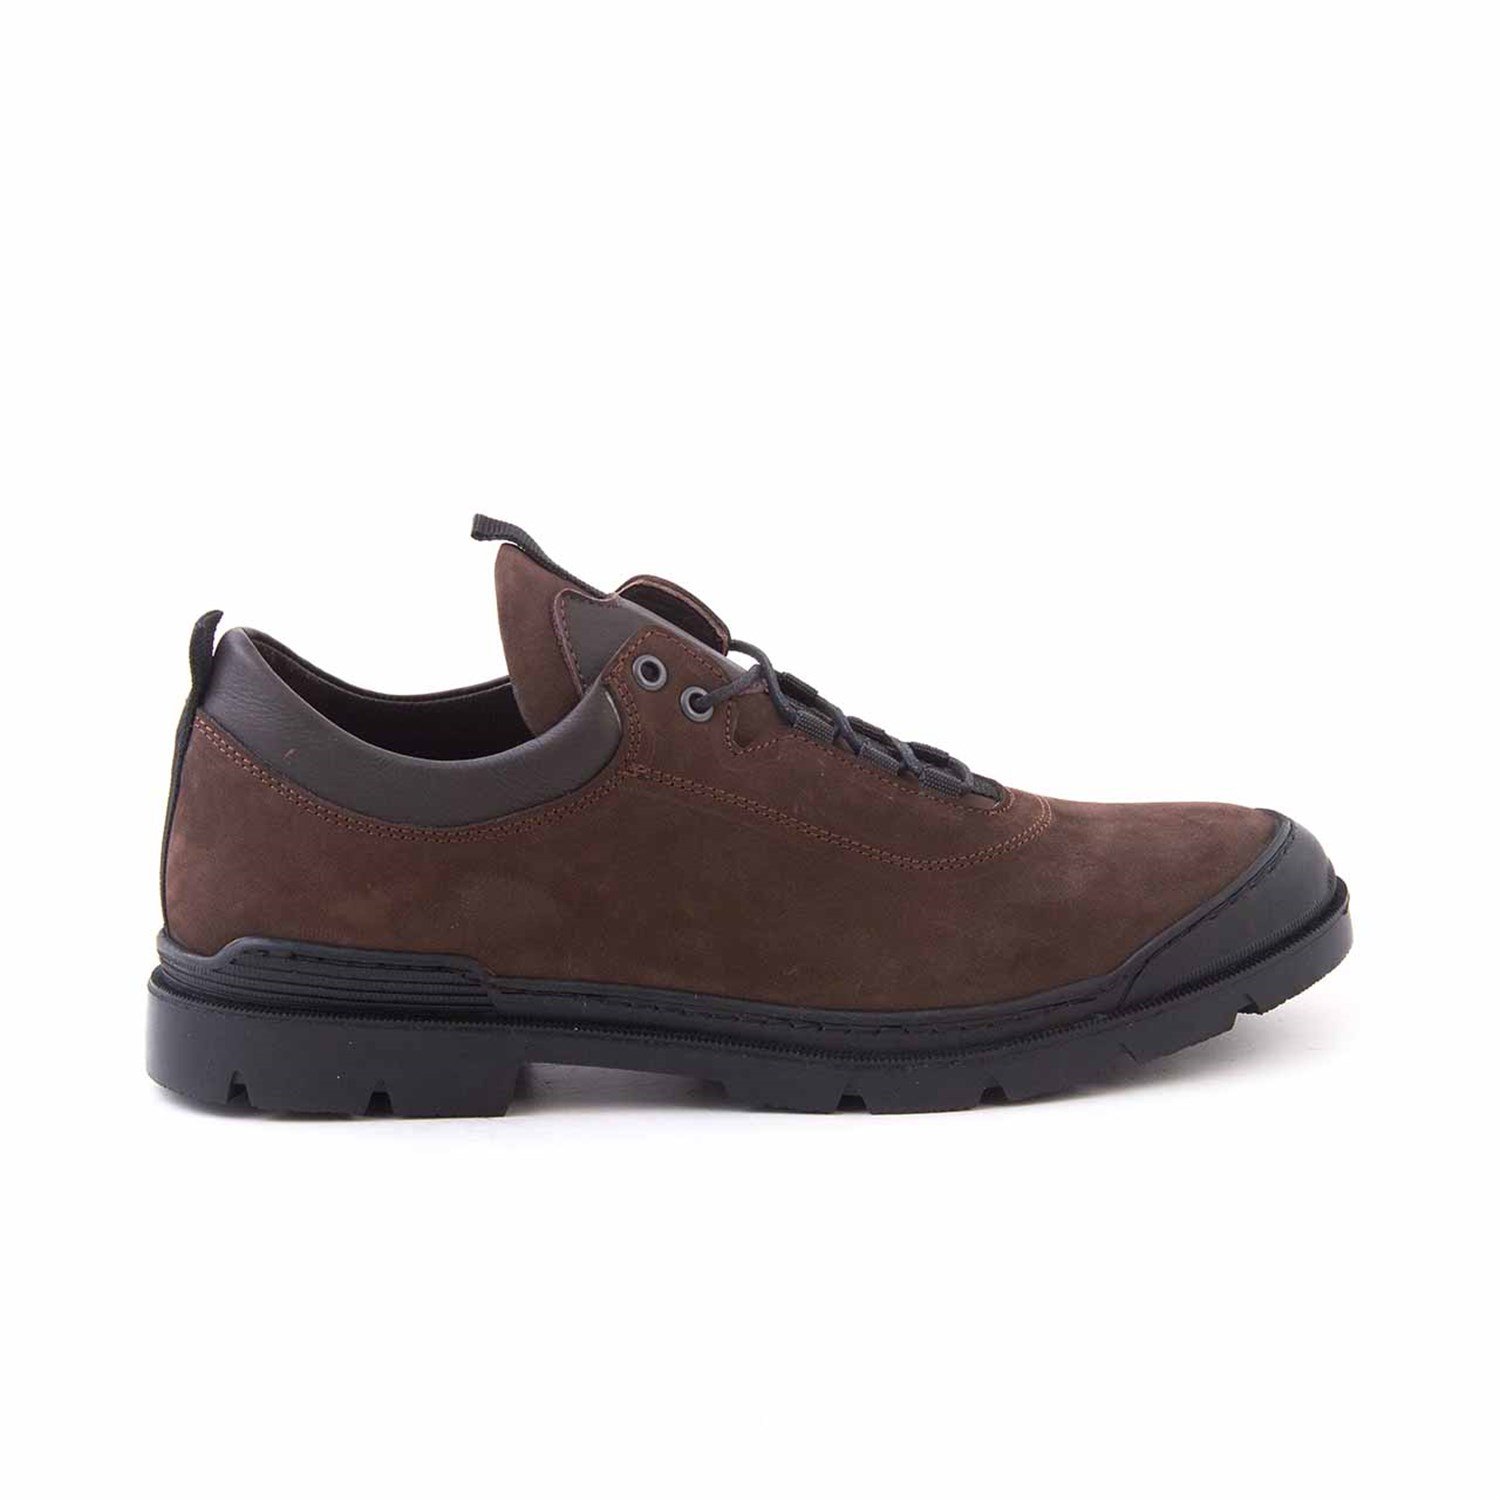 Kemal Tanca Leather Men's Casual Shoes